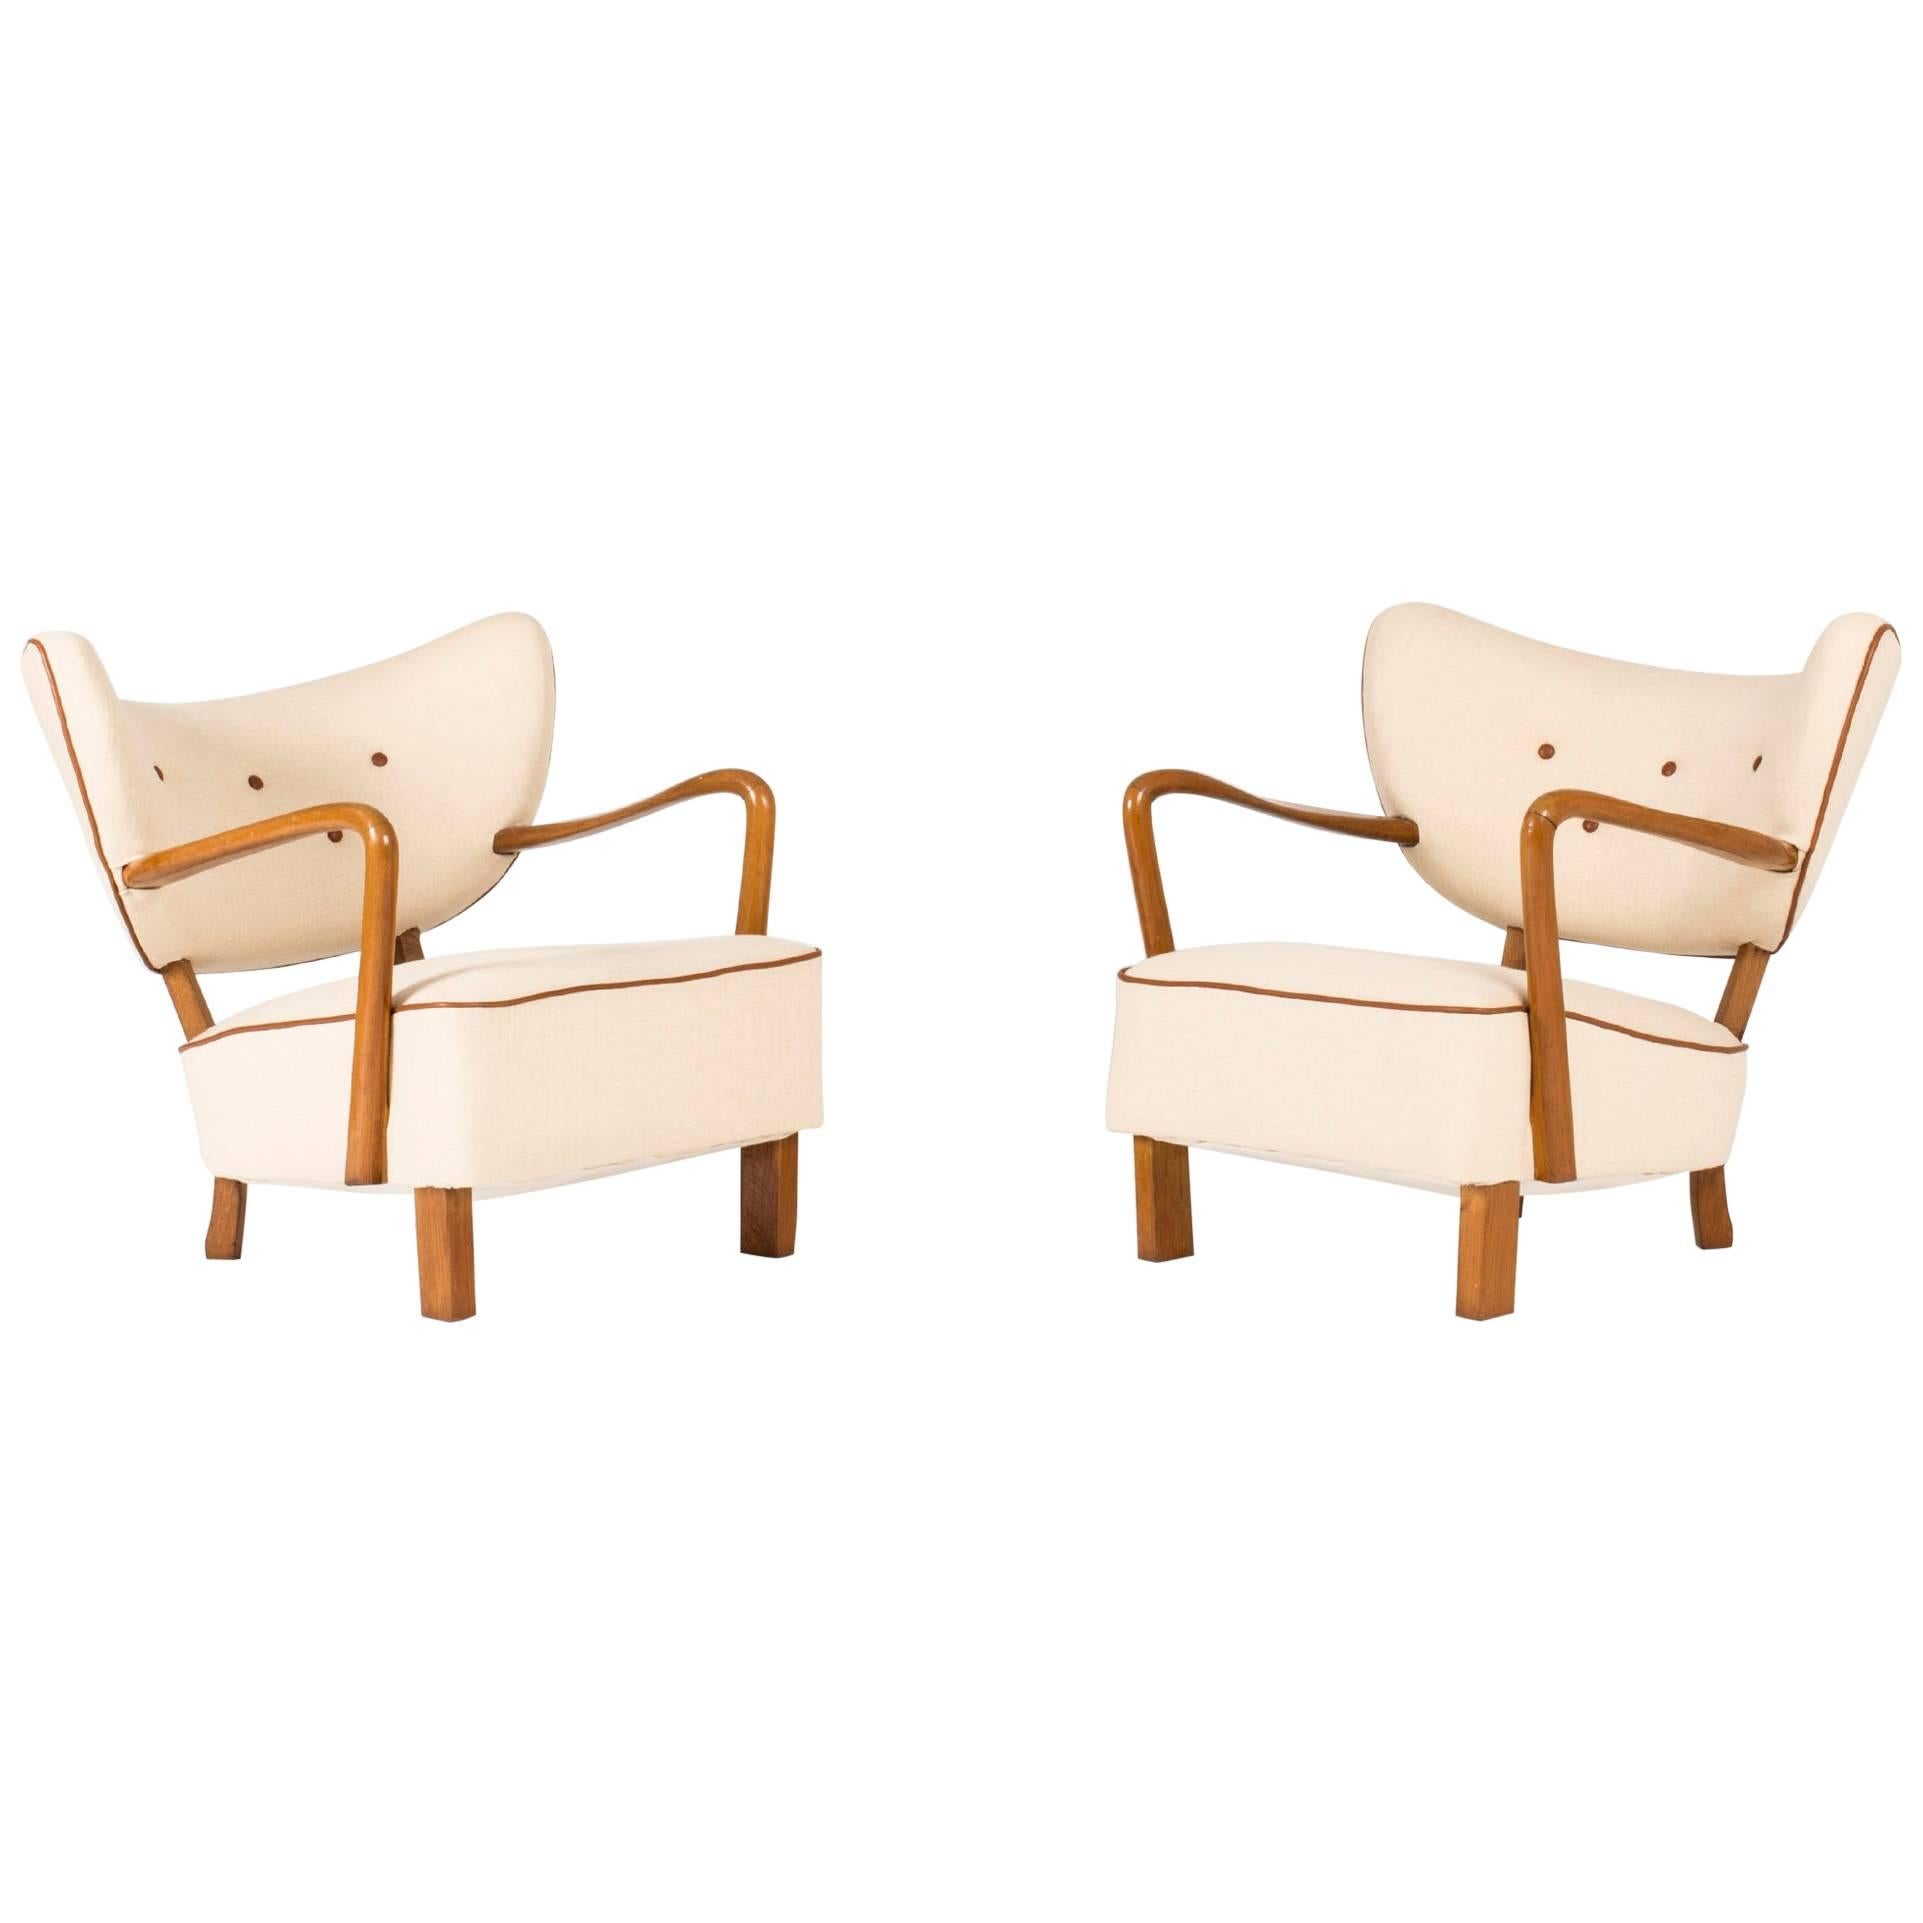 Pair of Lounge Chairs by Viggo Boesen